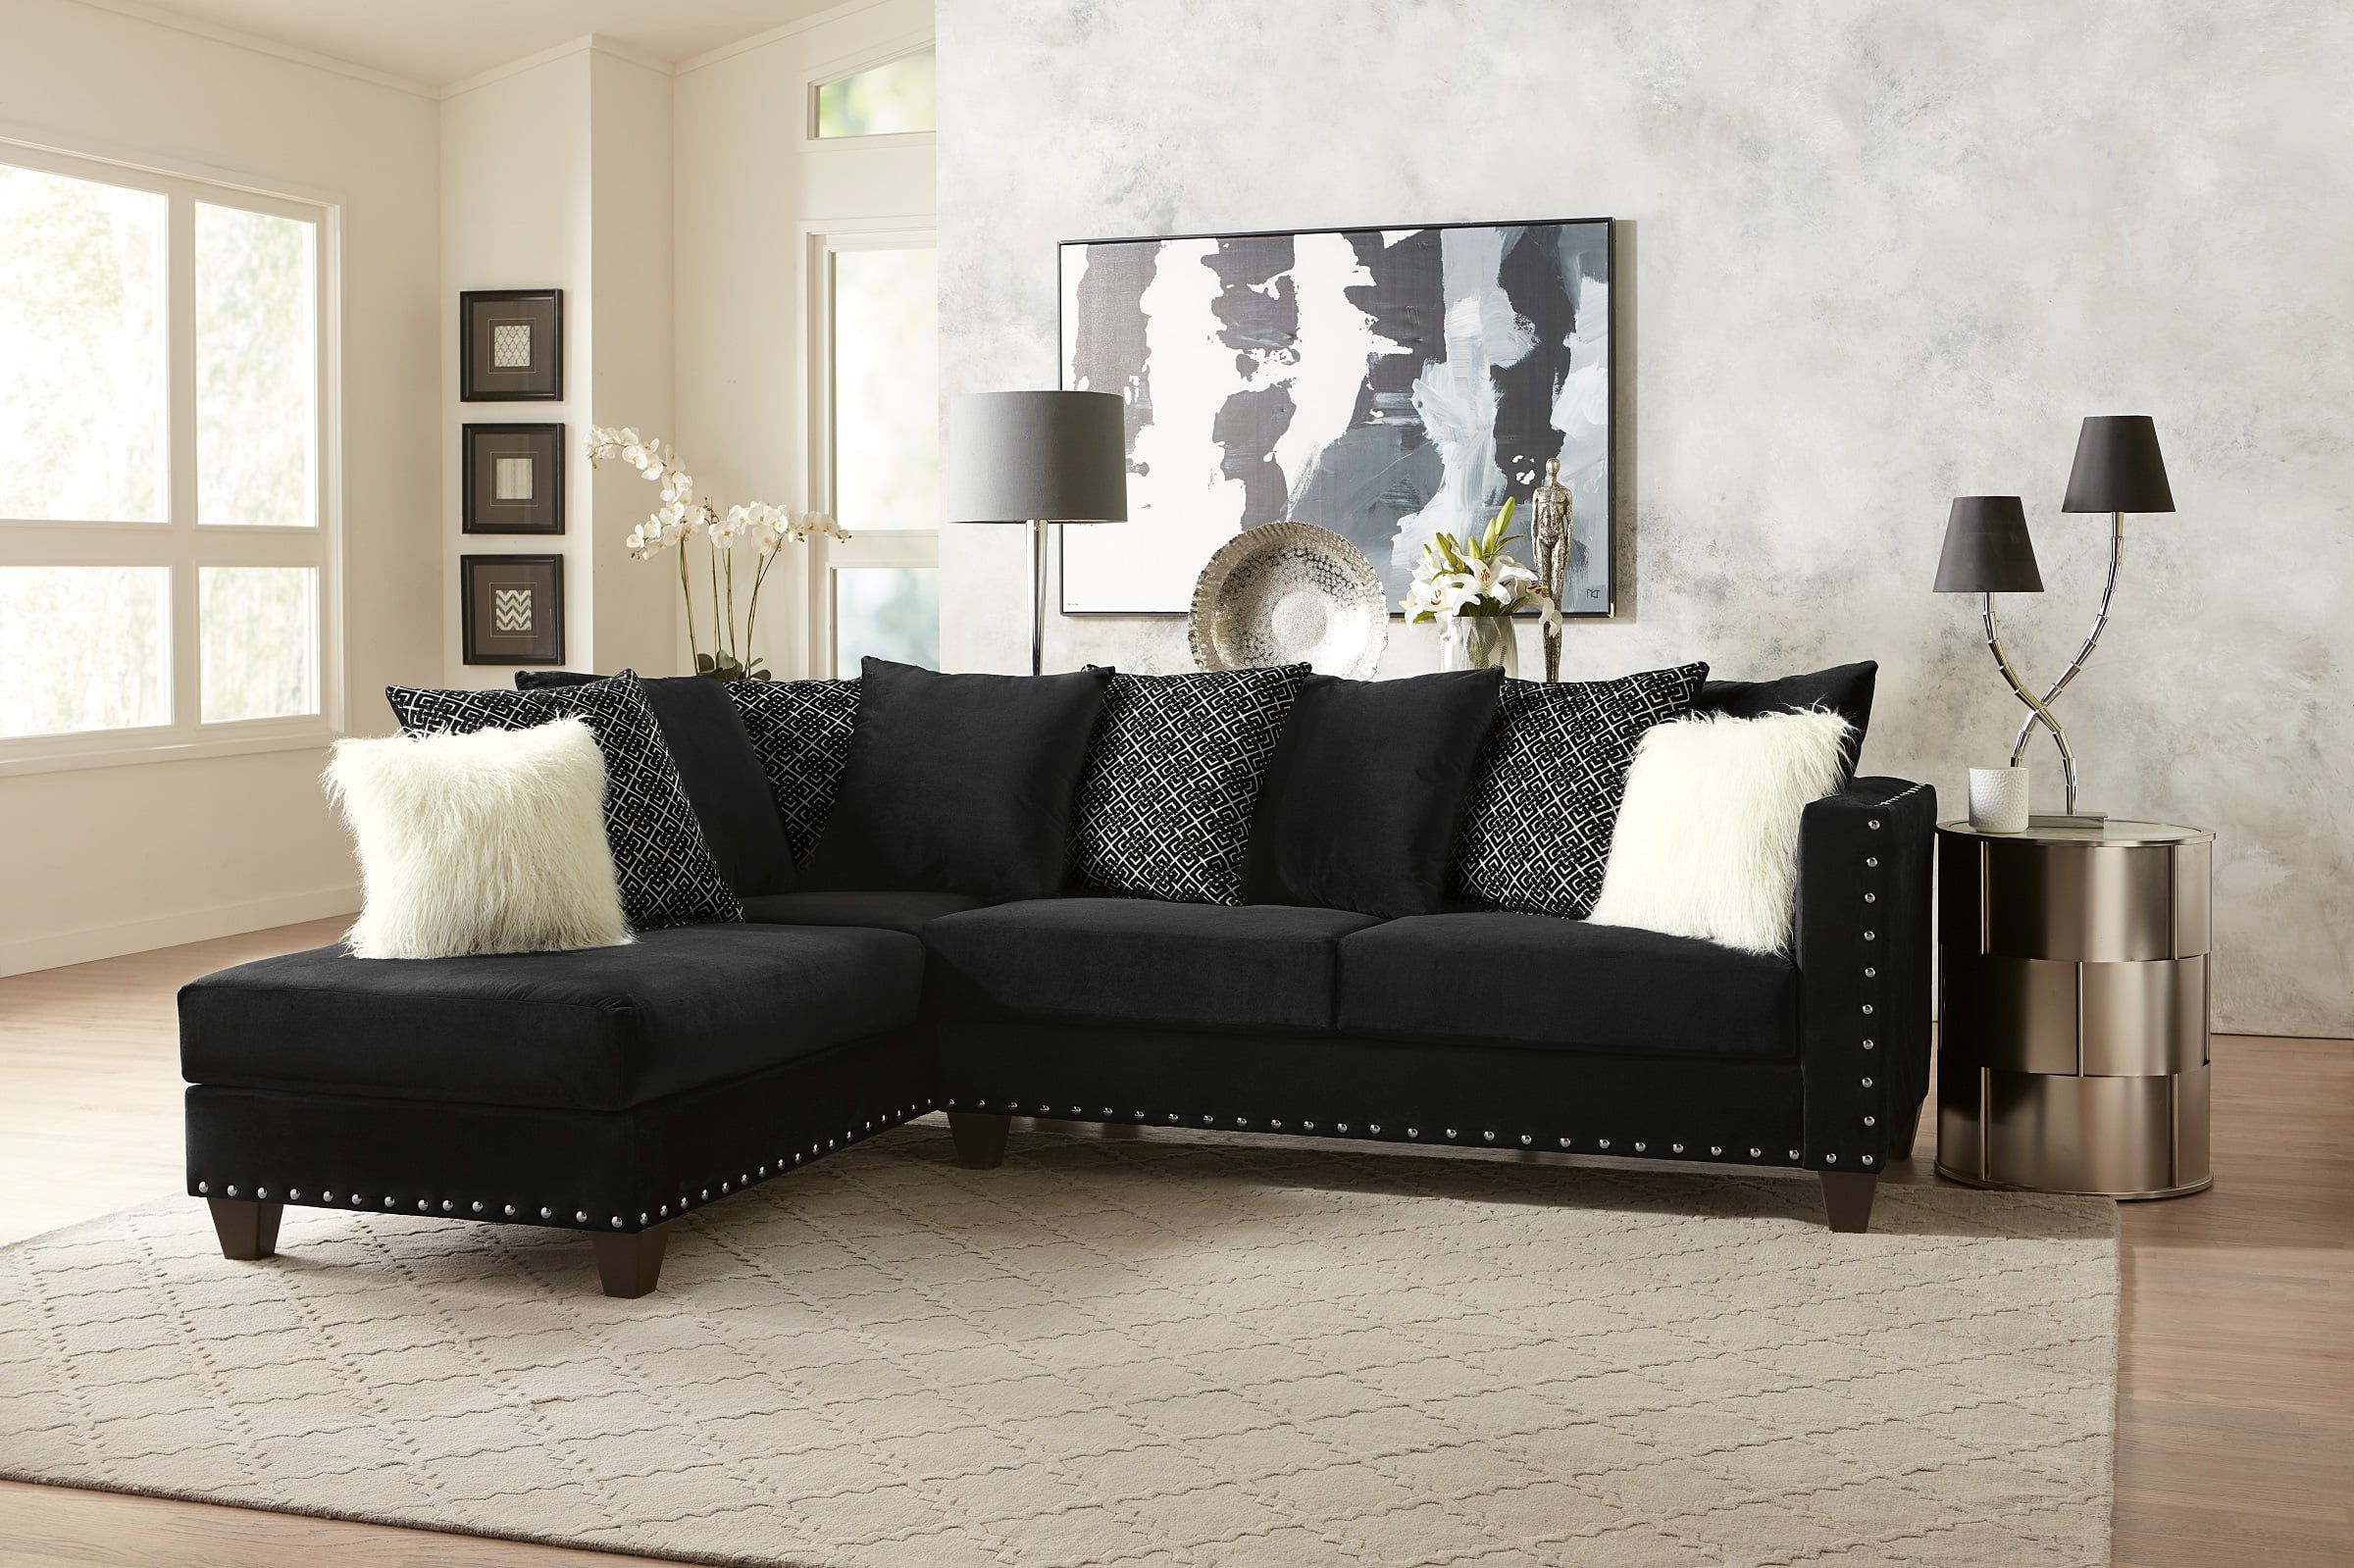 Living Room Modern Classic Black Fabric Sectional Sofa 2pc Set Cushion Regarding Sofas For Living Rooms (View 5 of 20)